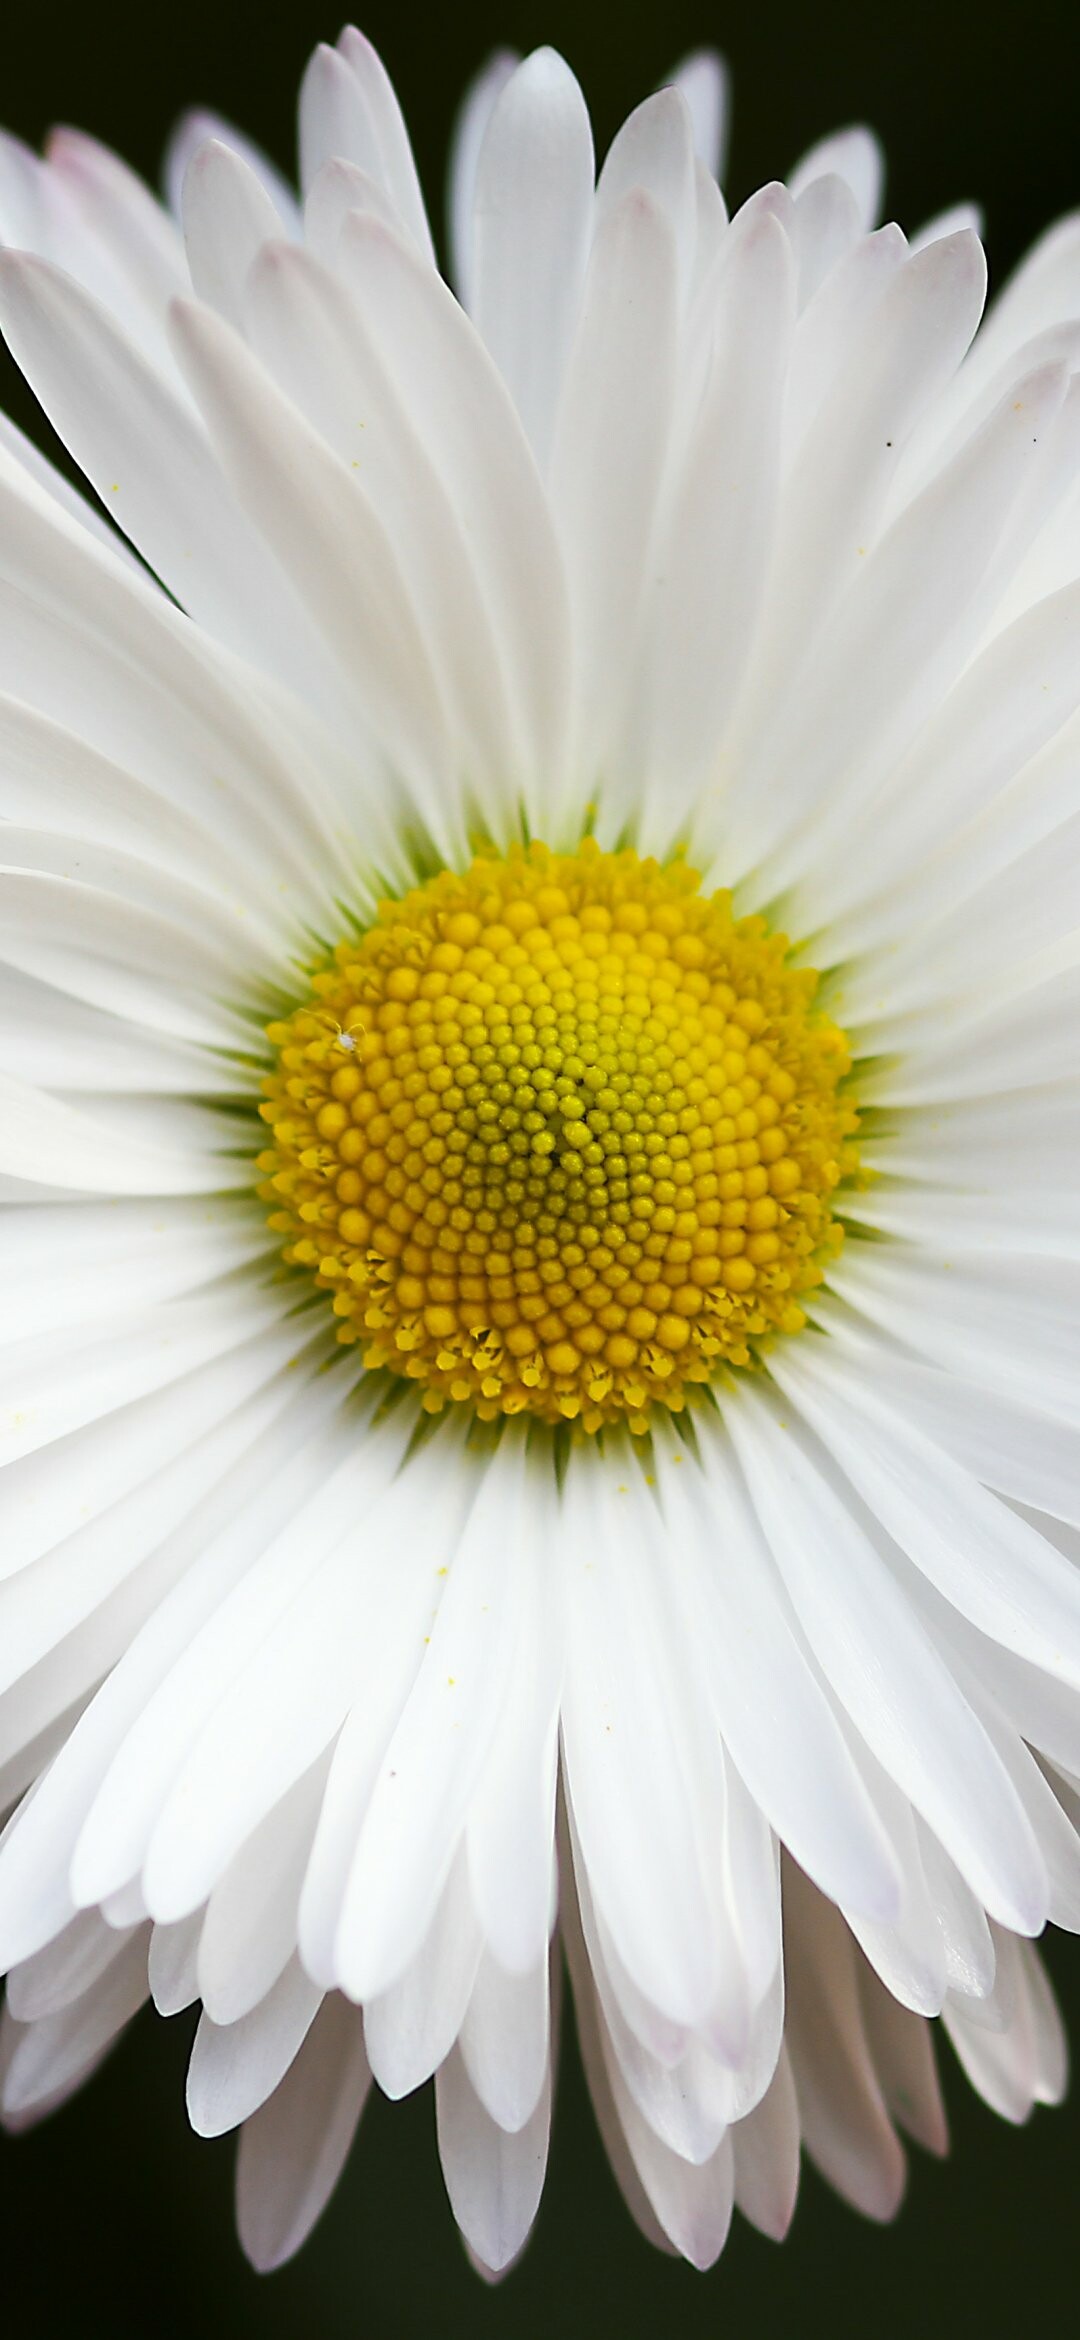 Daisy: Flowering plants that can thrive in both wet and dry climates, adapt well to sunny or shady areas, and can grow high in the mountains or on flat, grassy fields. 1080x2340 HD Wallpaper.